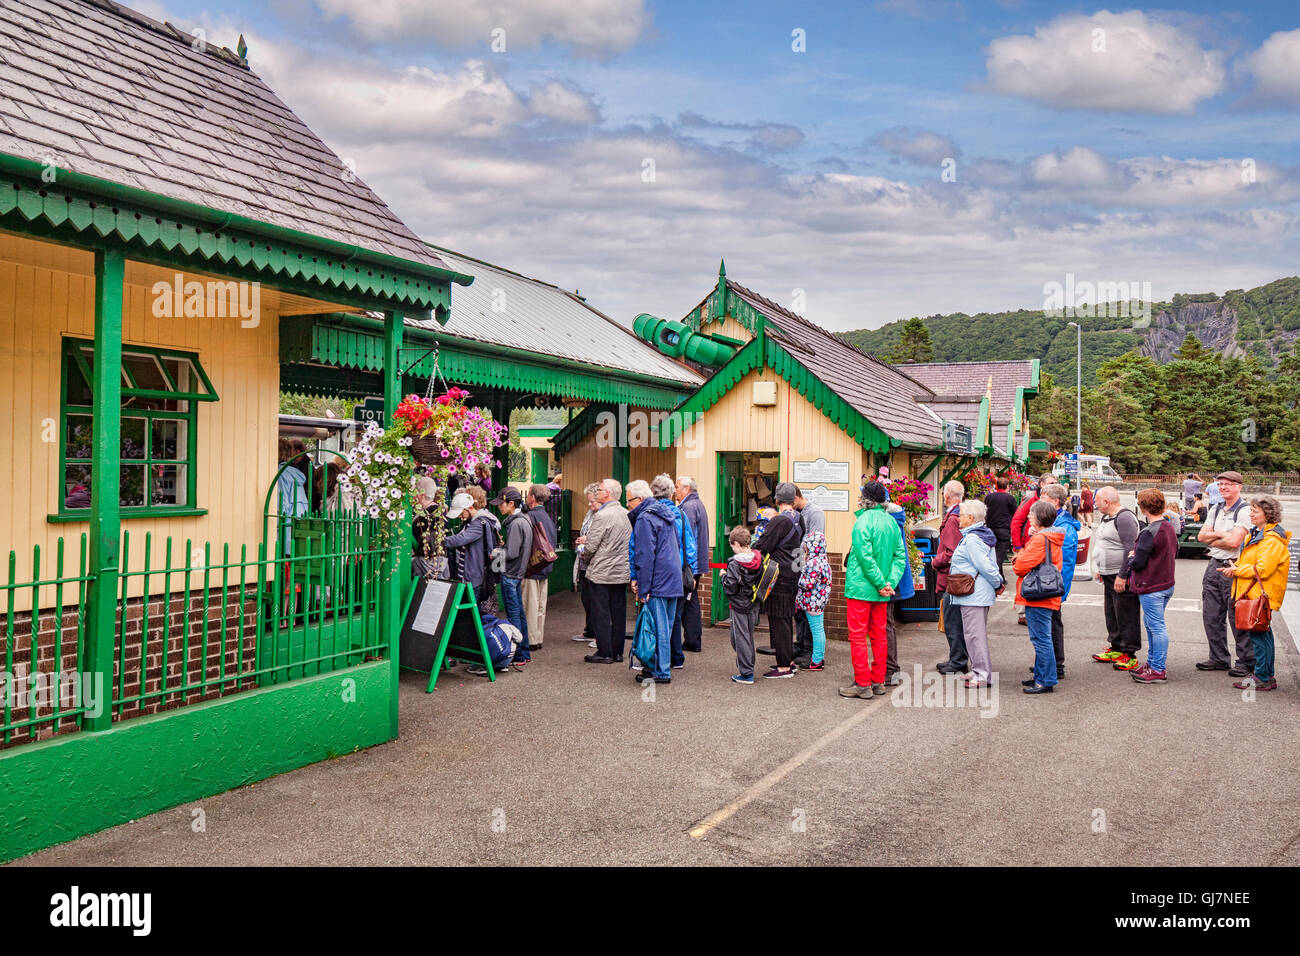 Queue of people in outdoor gear at Llanberis Station, waiting for the Snowdon Mountain Railway, Llanberis, Snowdonia National... Stock Photo